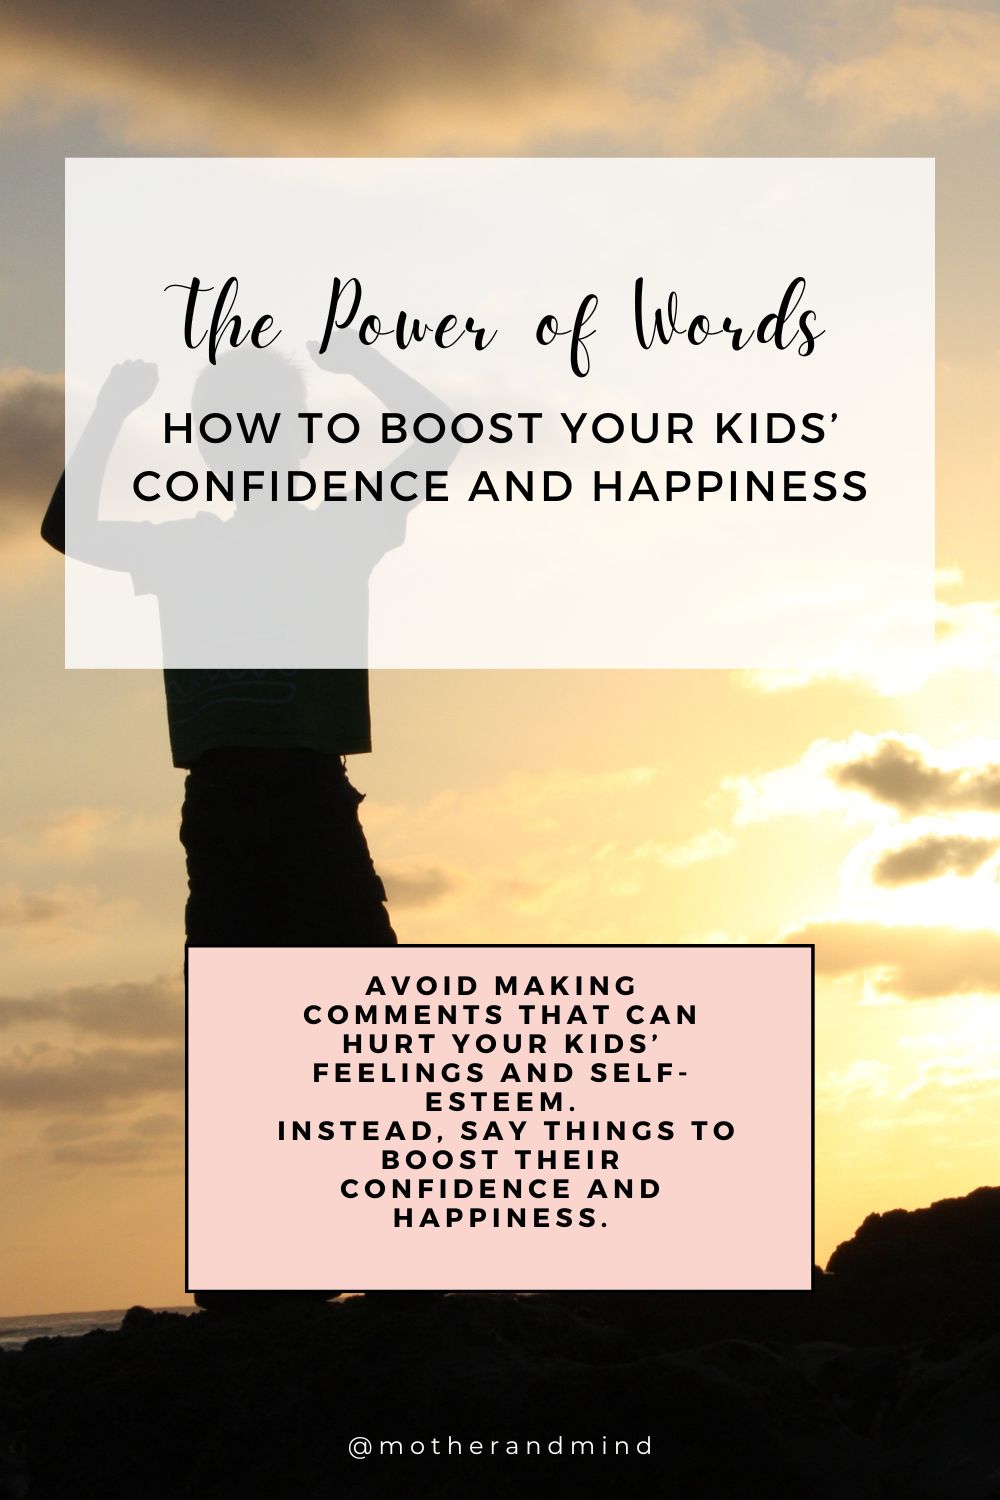 The Power of Words: How to Boost Your Kids’ Confidence and Happiness